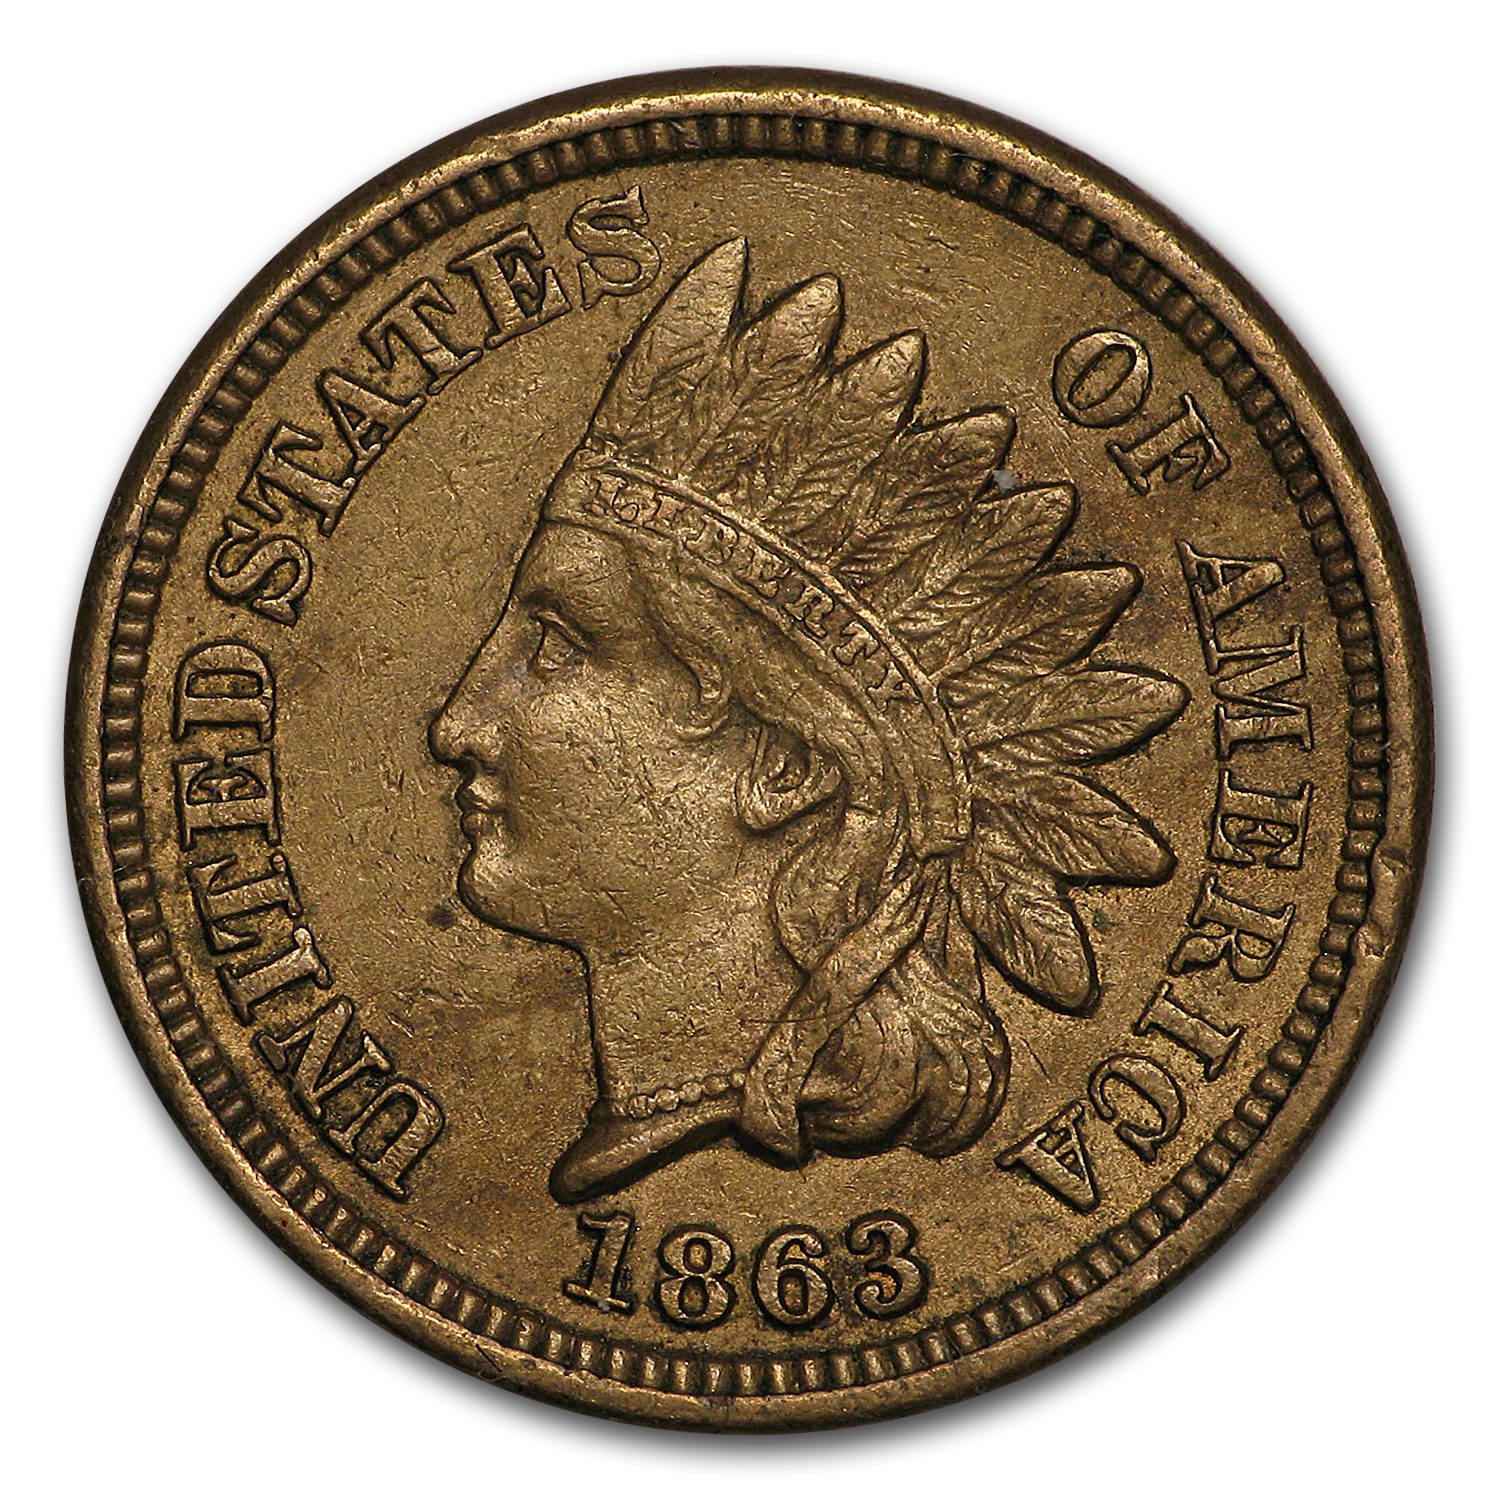 Buy 1863 Indian Head Cent XF